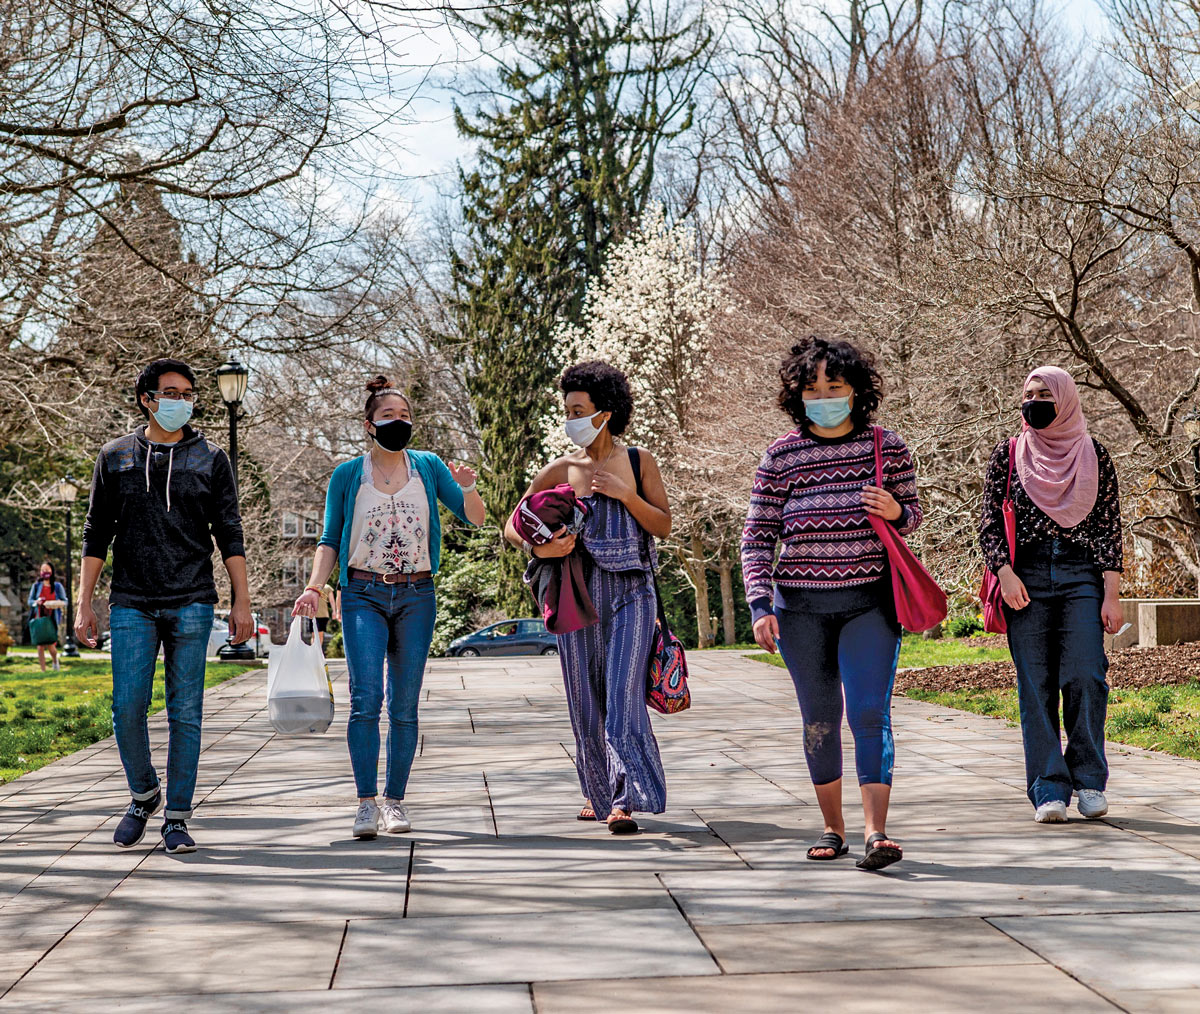 1 male and four female students walking in line through campus on a sunny day, with budding trees in the background. They are all wearing facemasks.